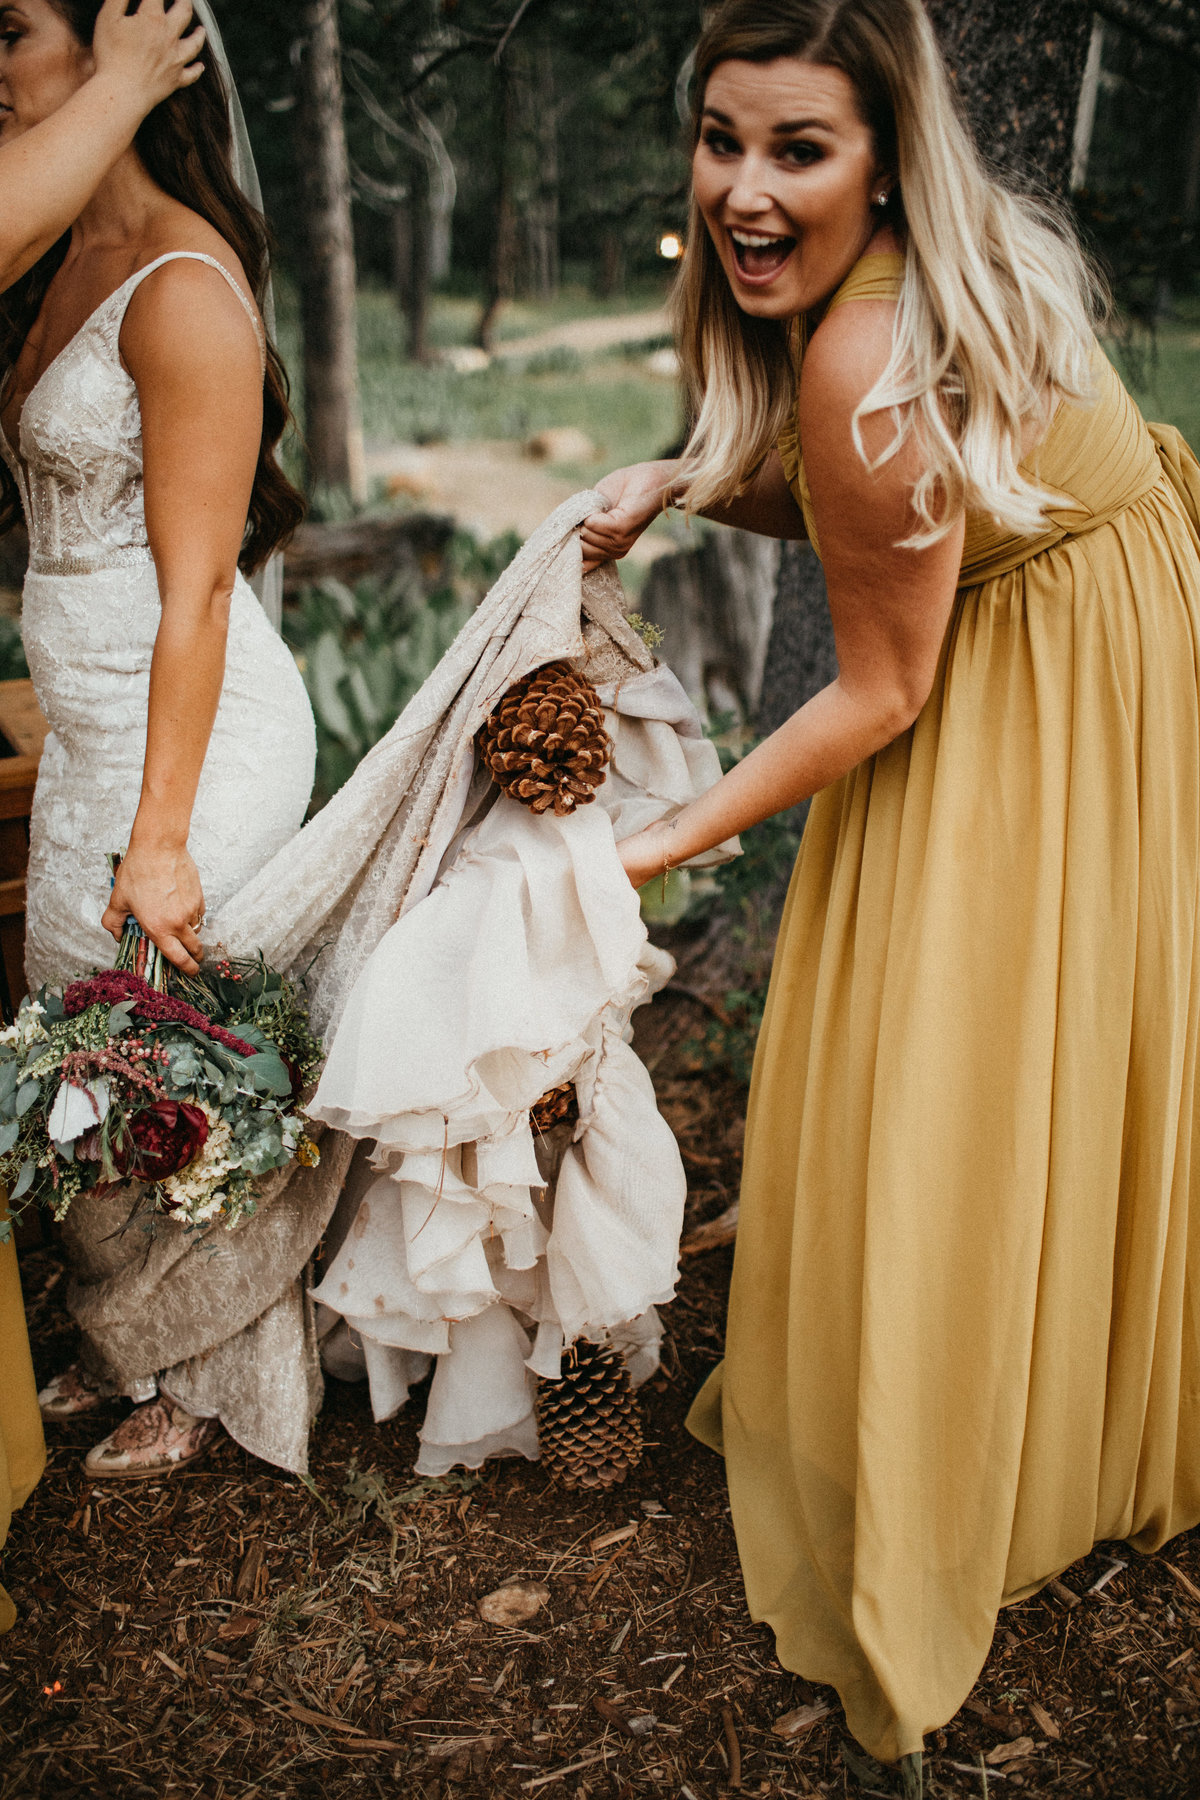 Tahoe Wedding Planners brides dress with pinecone at summer wedding venue Mitchell's Mountain Meadows Sierraville near Truckee, Joy of Life Events image by Lukas Koryn